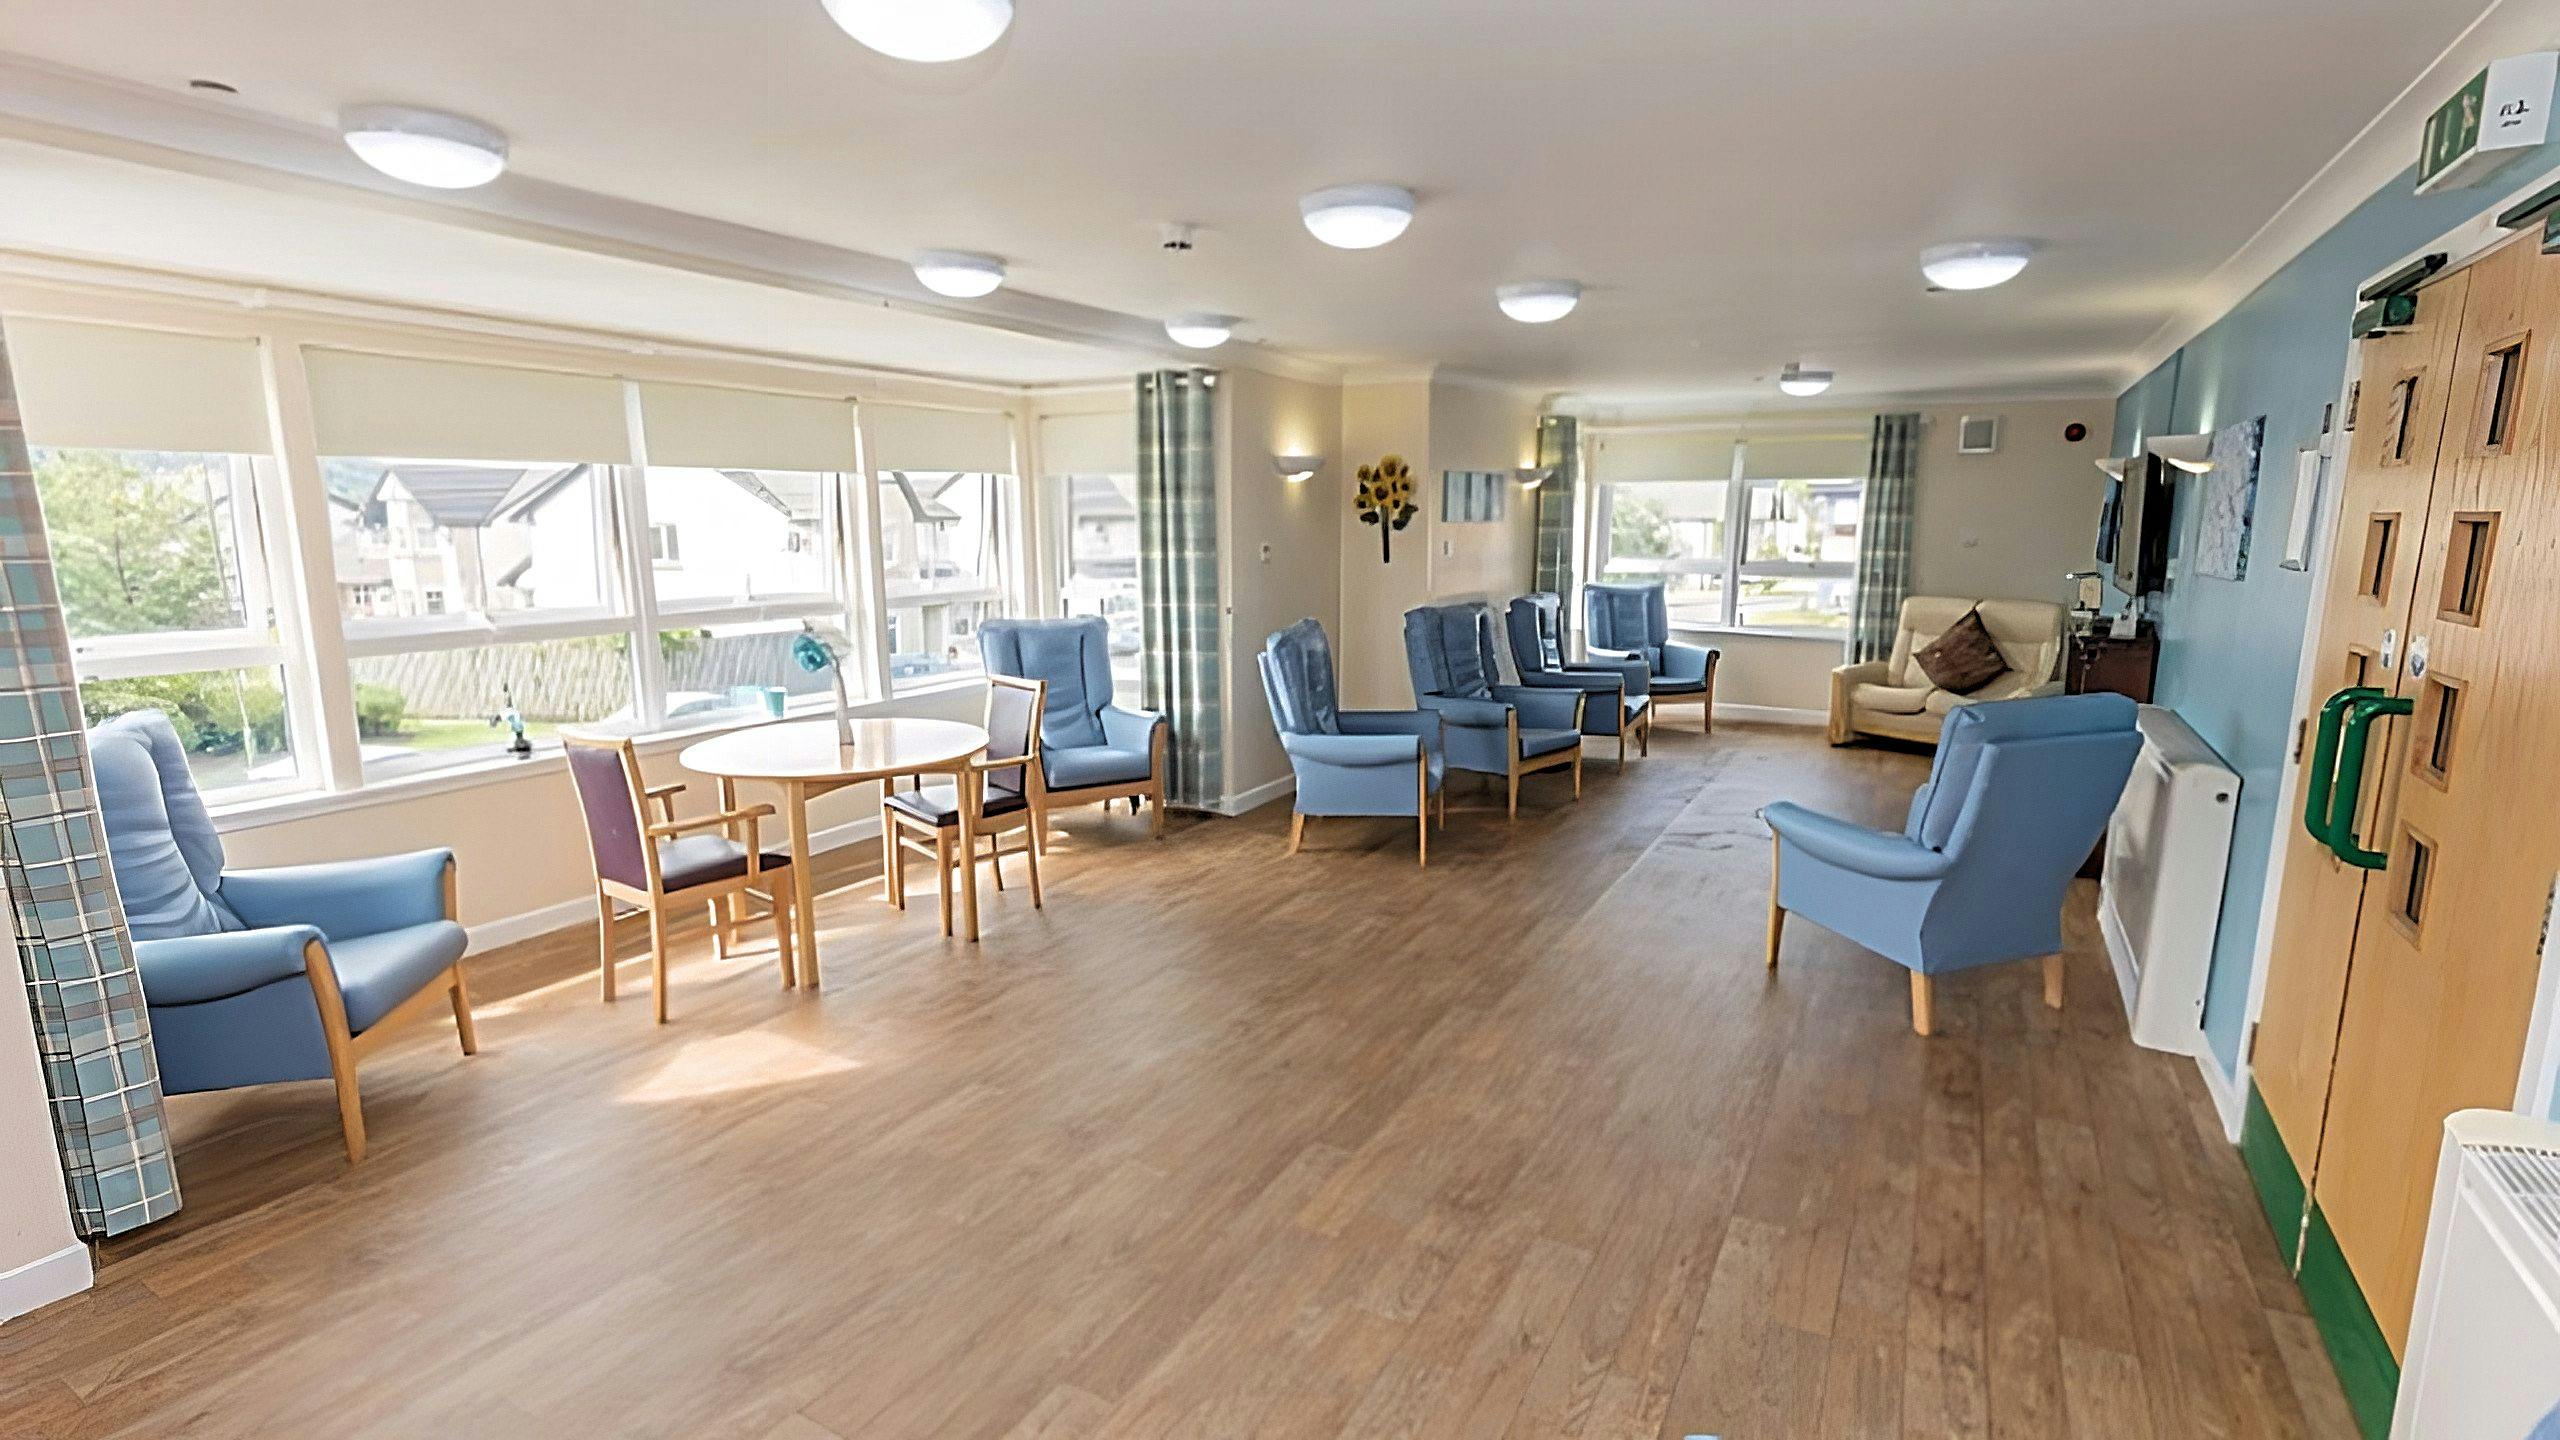 Countrywide - Wallace View care home 4